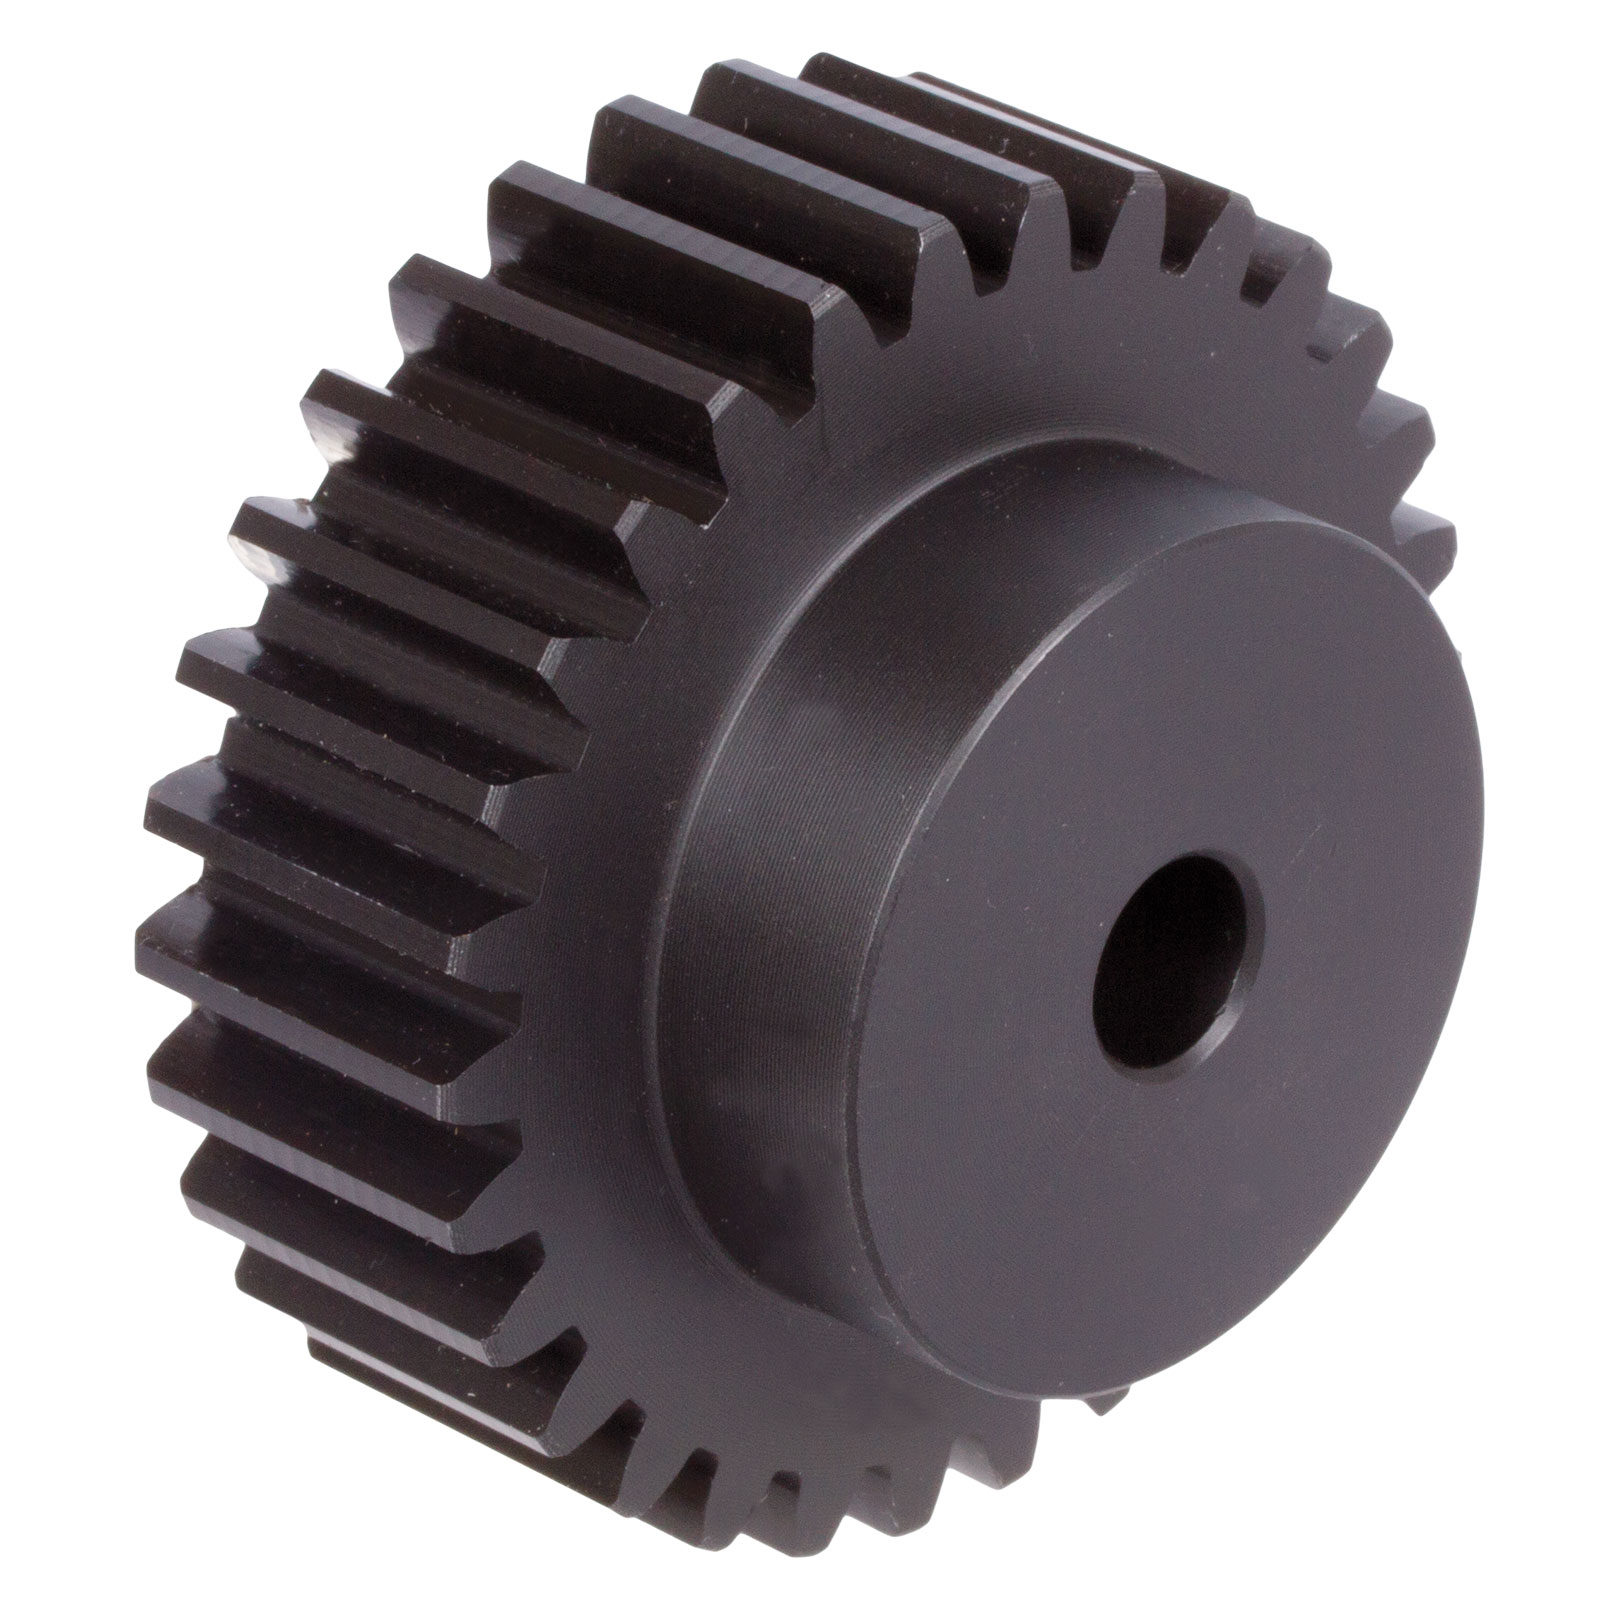 Spur gear made of POM with hub module 1 21 teeth tooth width 10mm outside diameter 23mm 